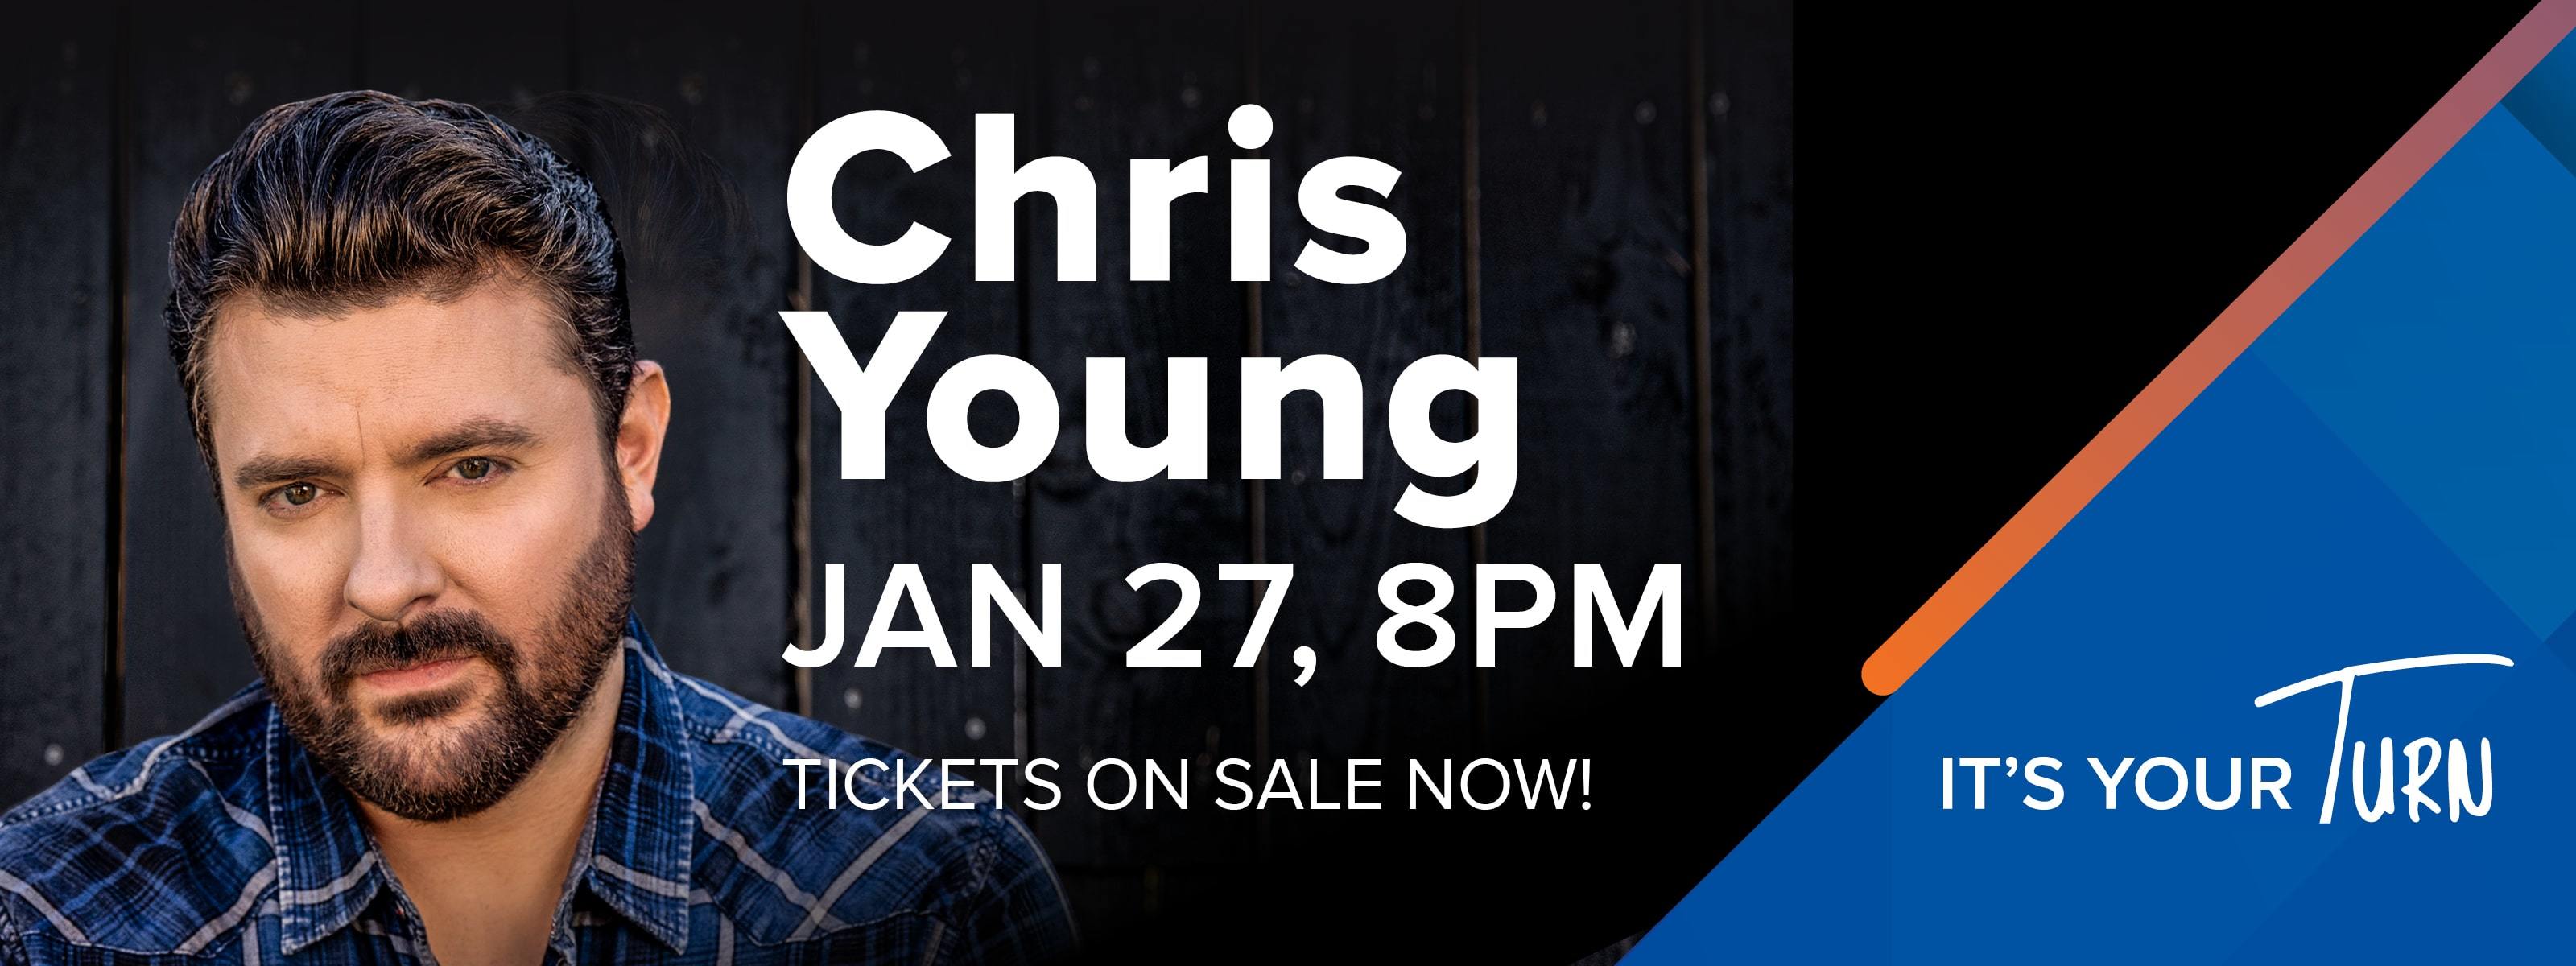 Chris Young Jan 27 8pm Tickets On Sale Now